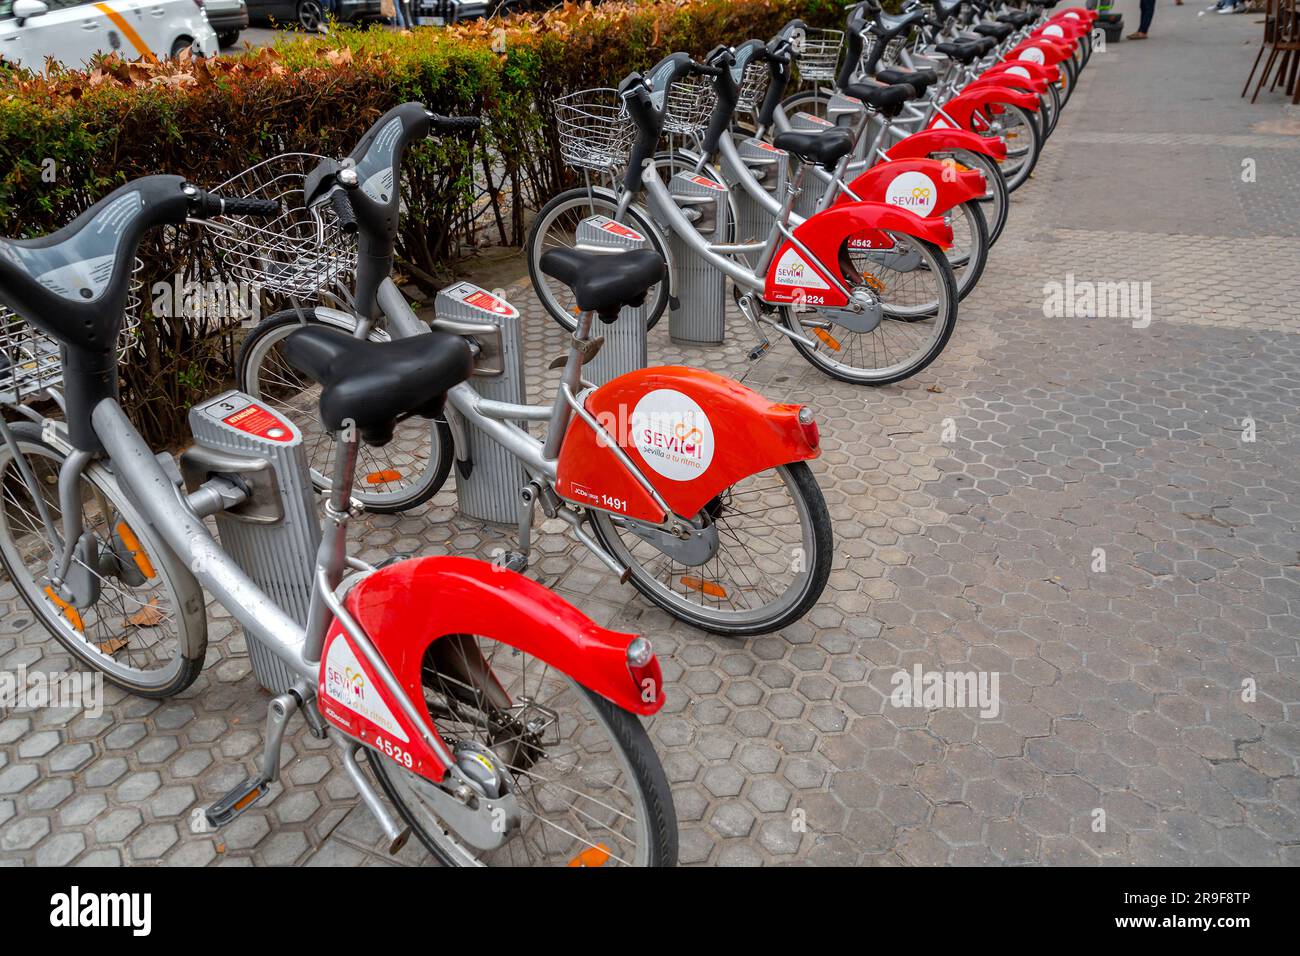 Seville, Spain-FEB 24, 2022: Public shared bikes parked at a station in Seville, Spain. The municipal service is named Sevici. Stock Photo